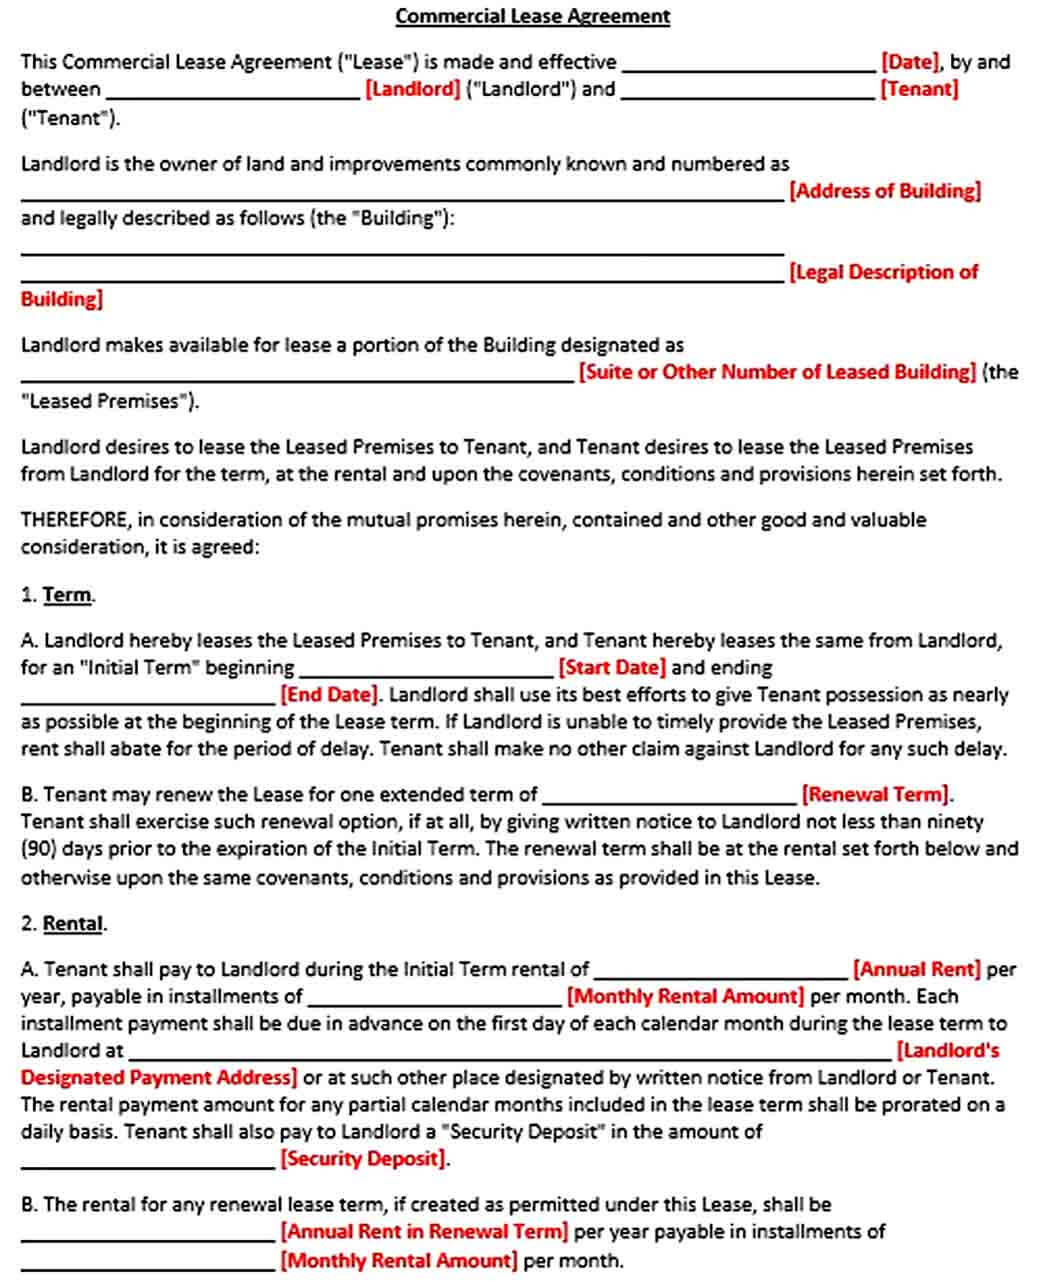 Sample Basic Commercial Lease Agreement Template